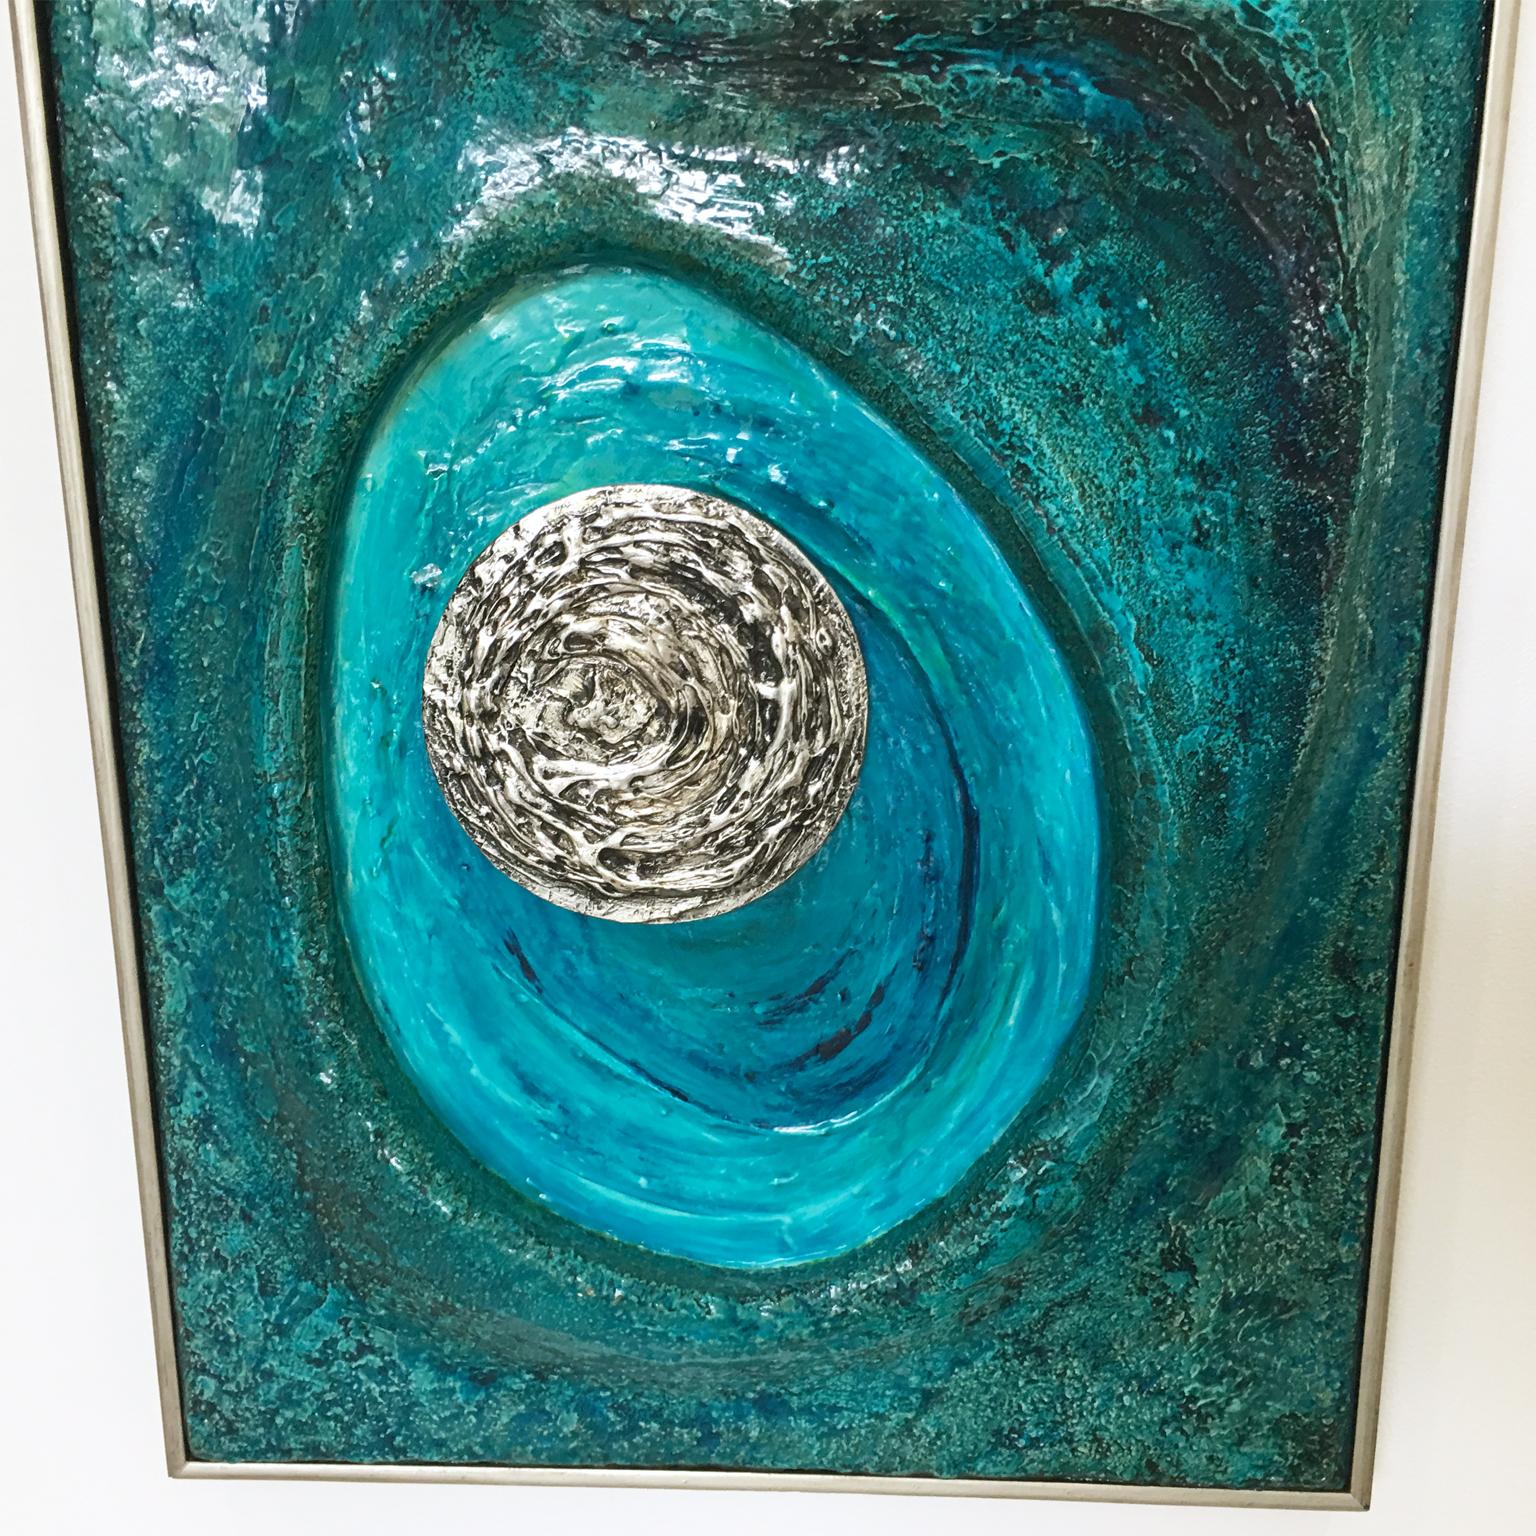 Psychedelic Turquoise Acrylic Resin Art Wall Sculpture Panel by Lorraine Stelzer For Sale 5